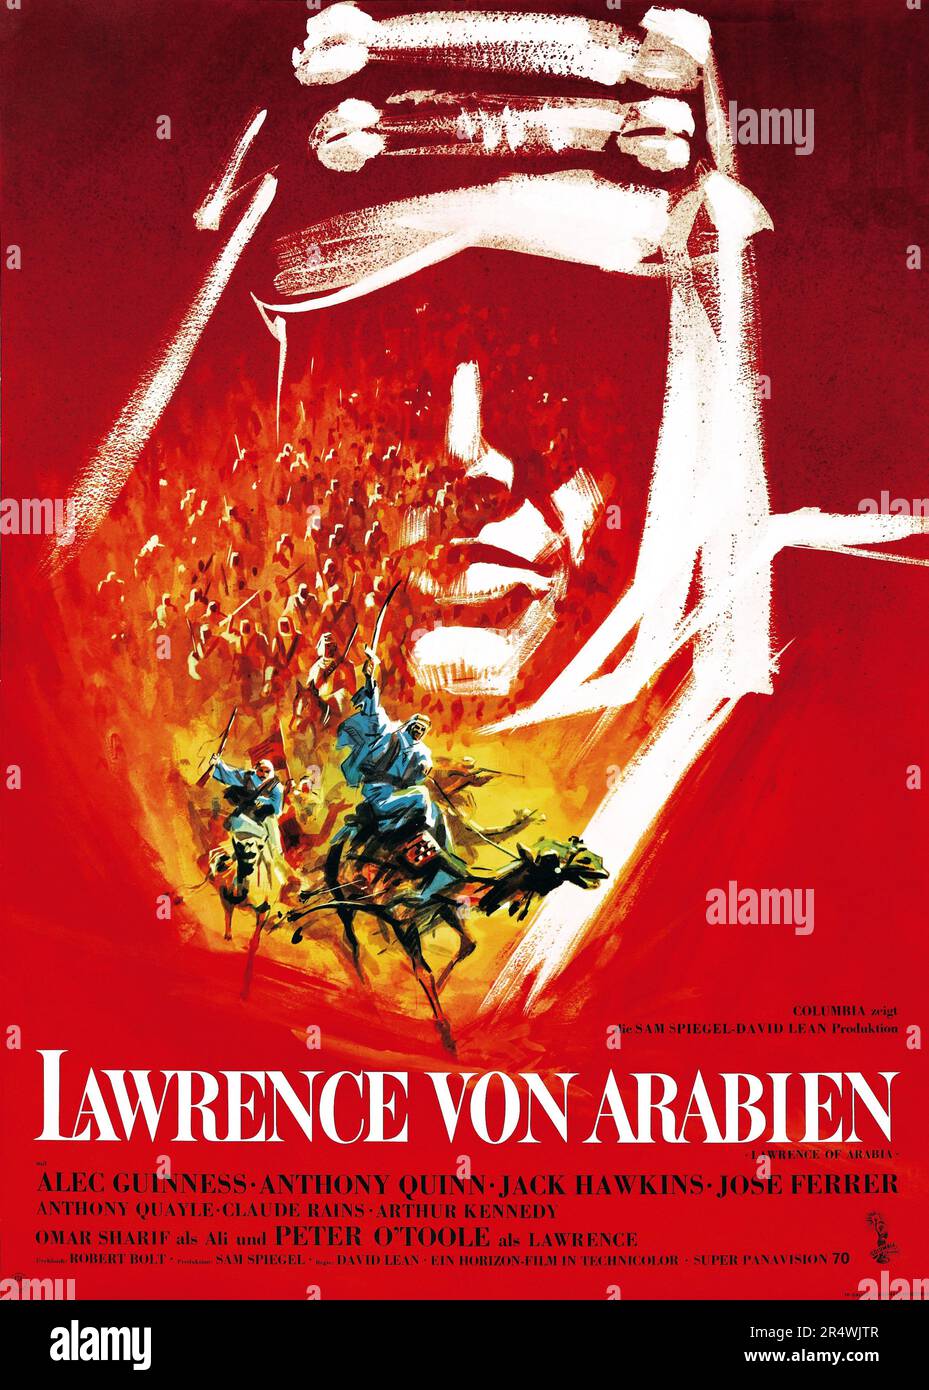 Lawrence of Arabia is a 1962 British epic adventure drama film based on the life of T. E. Lawrence. It was directed by David Lean and stars Peter O'Toole in the title role. It is widely considered one of the greatest and most influential films in the history of cinema. Stock Photo